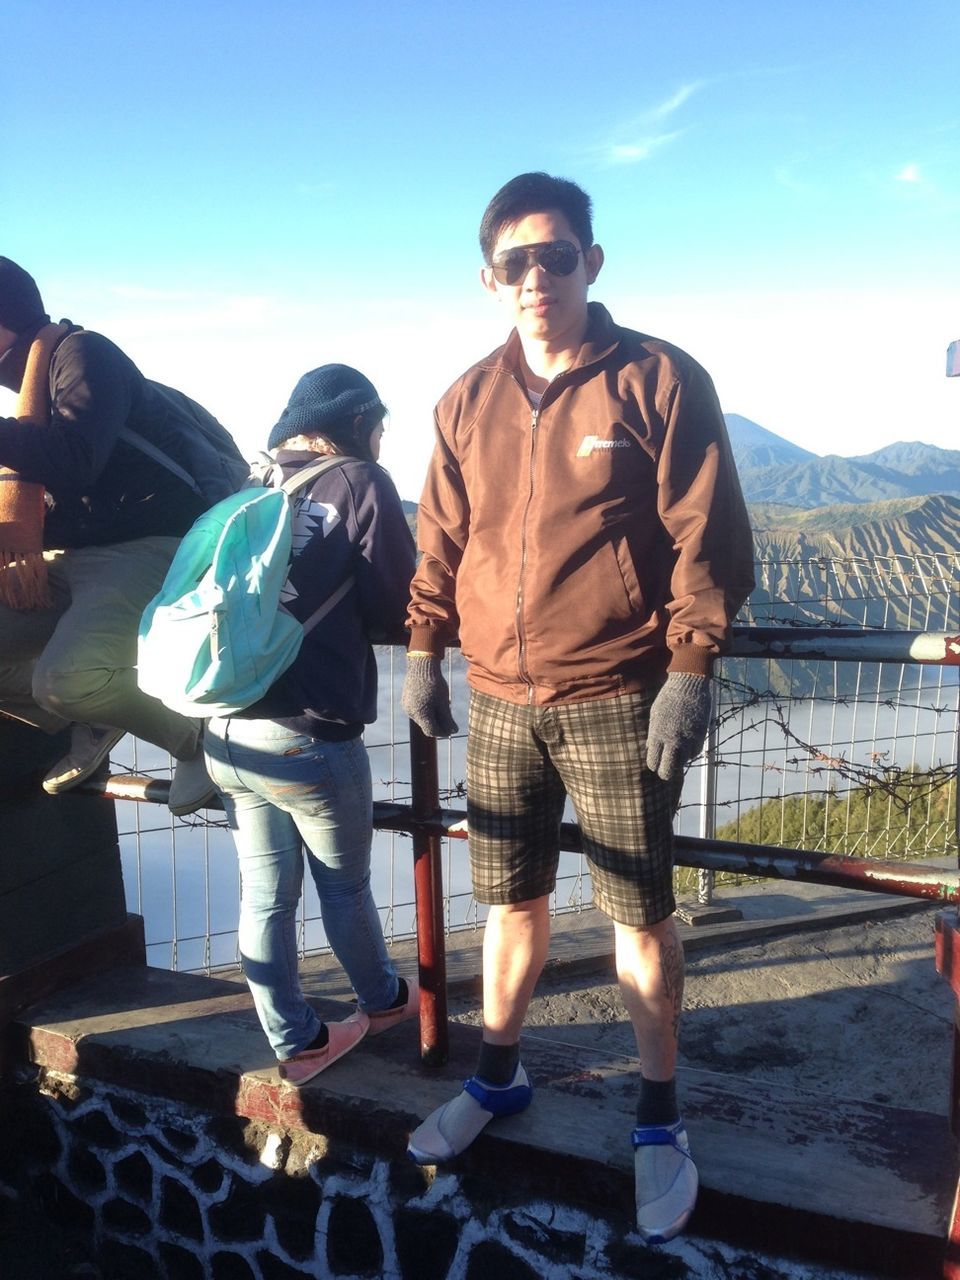 lifestyles, casual clothing, leisure activity, full length, standing, young men, young adult, sunlight, sky, person, railing, sitting, men, togetherness, clear sky, mountain, three quarter length